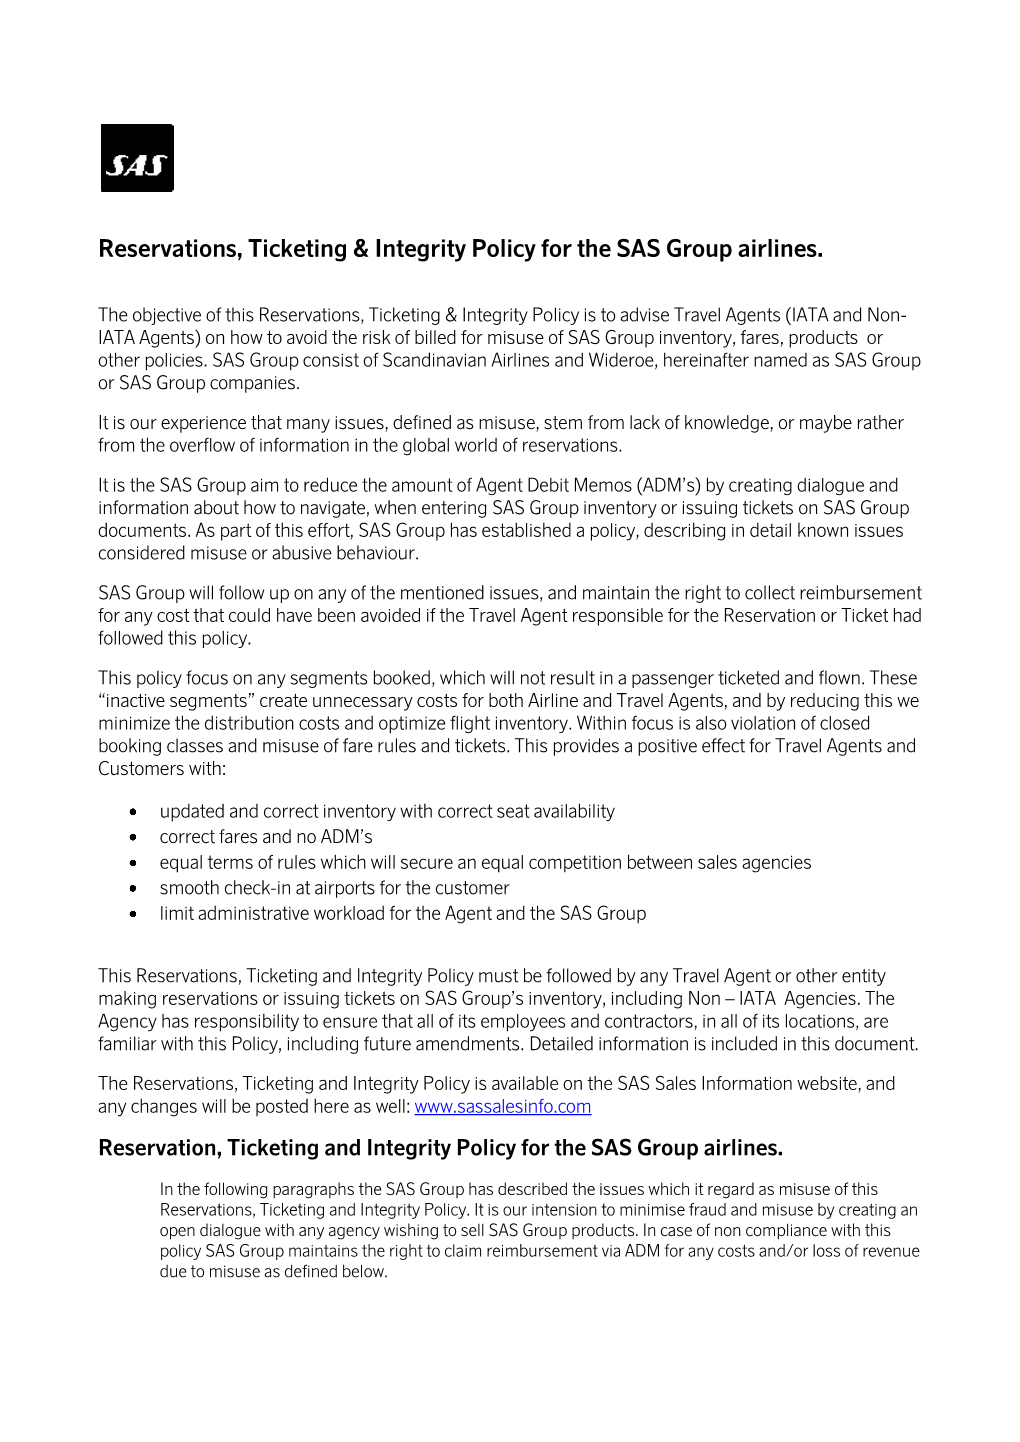 Reservations, Ticketing & Integrity Policy for the SAS Group Airlines